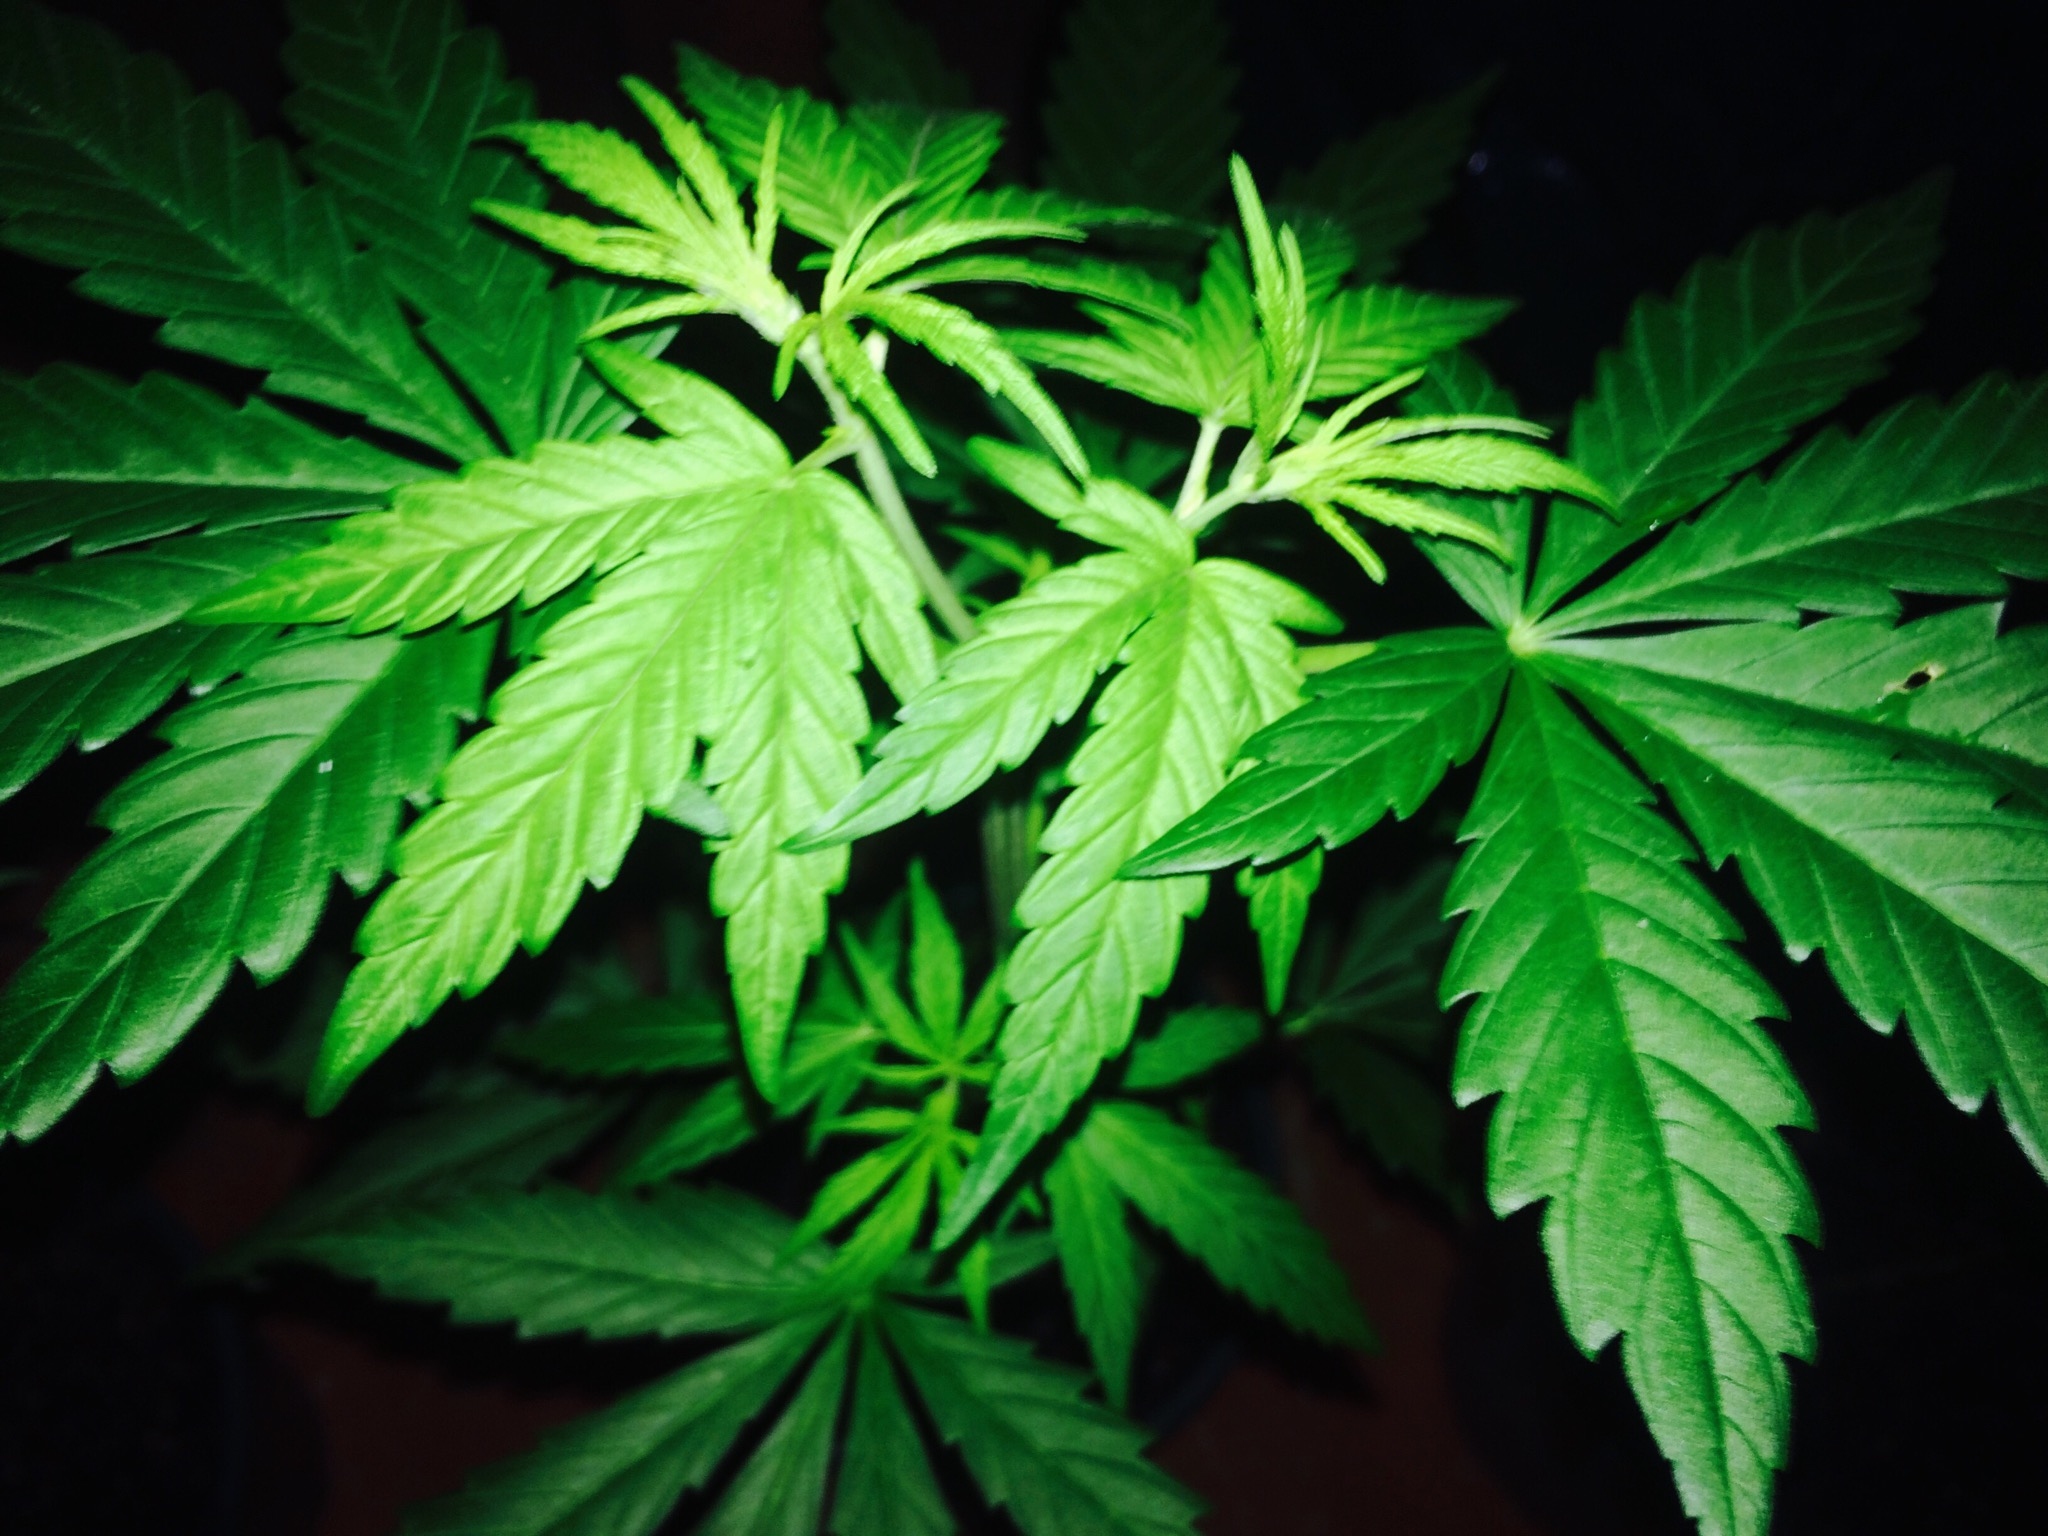 Cannabis use linked to lesions on arteries